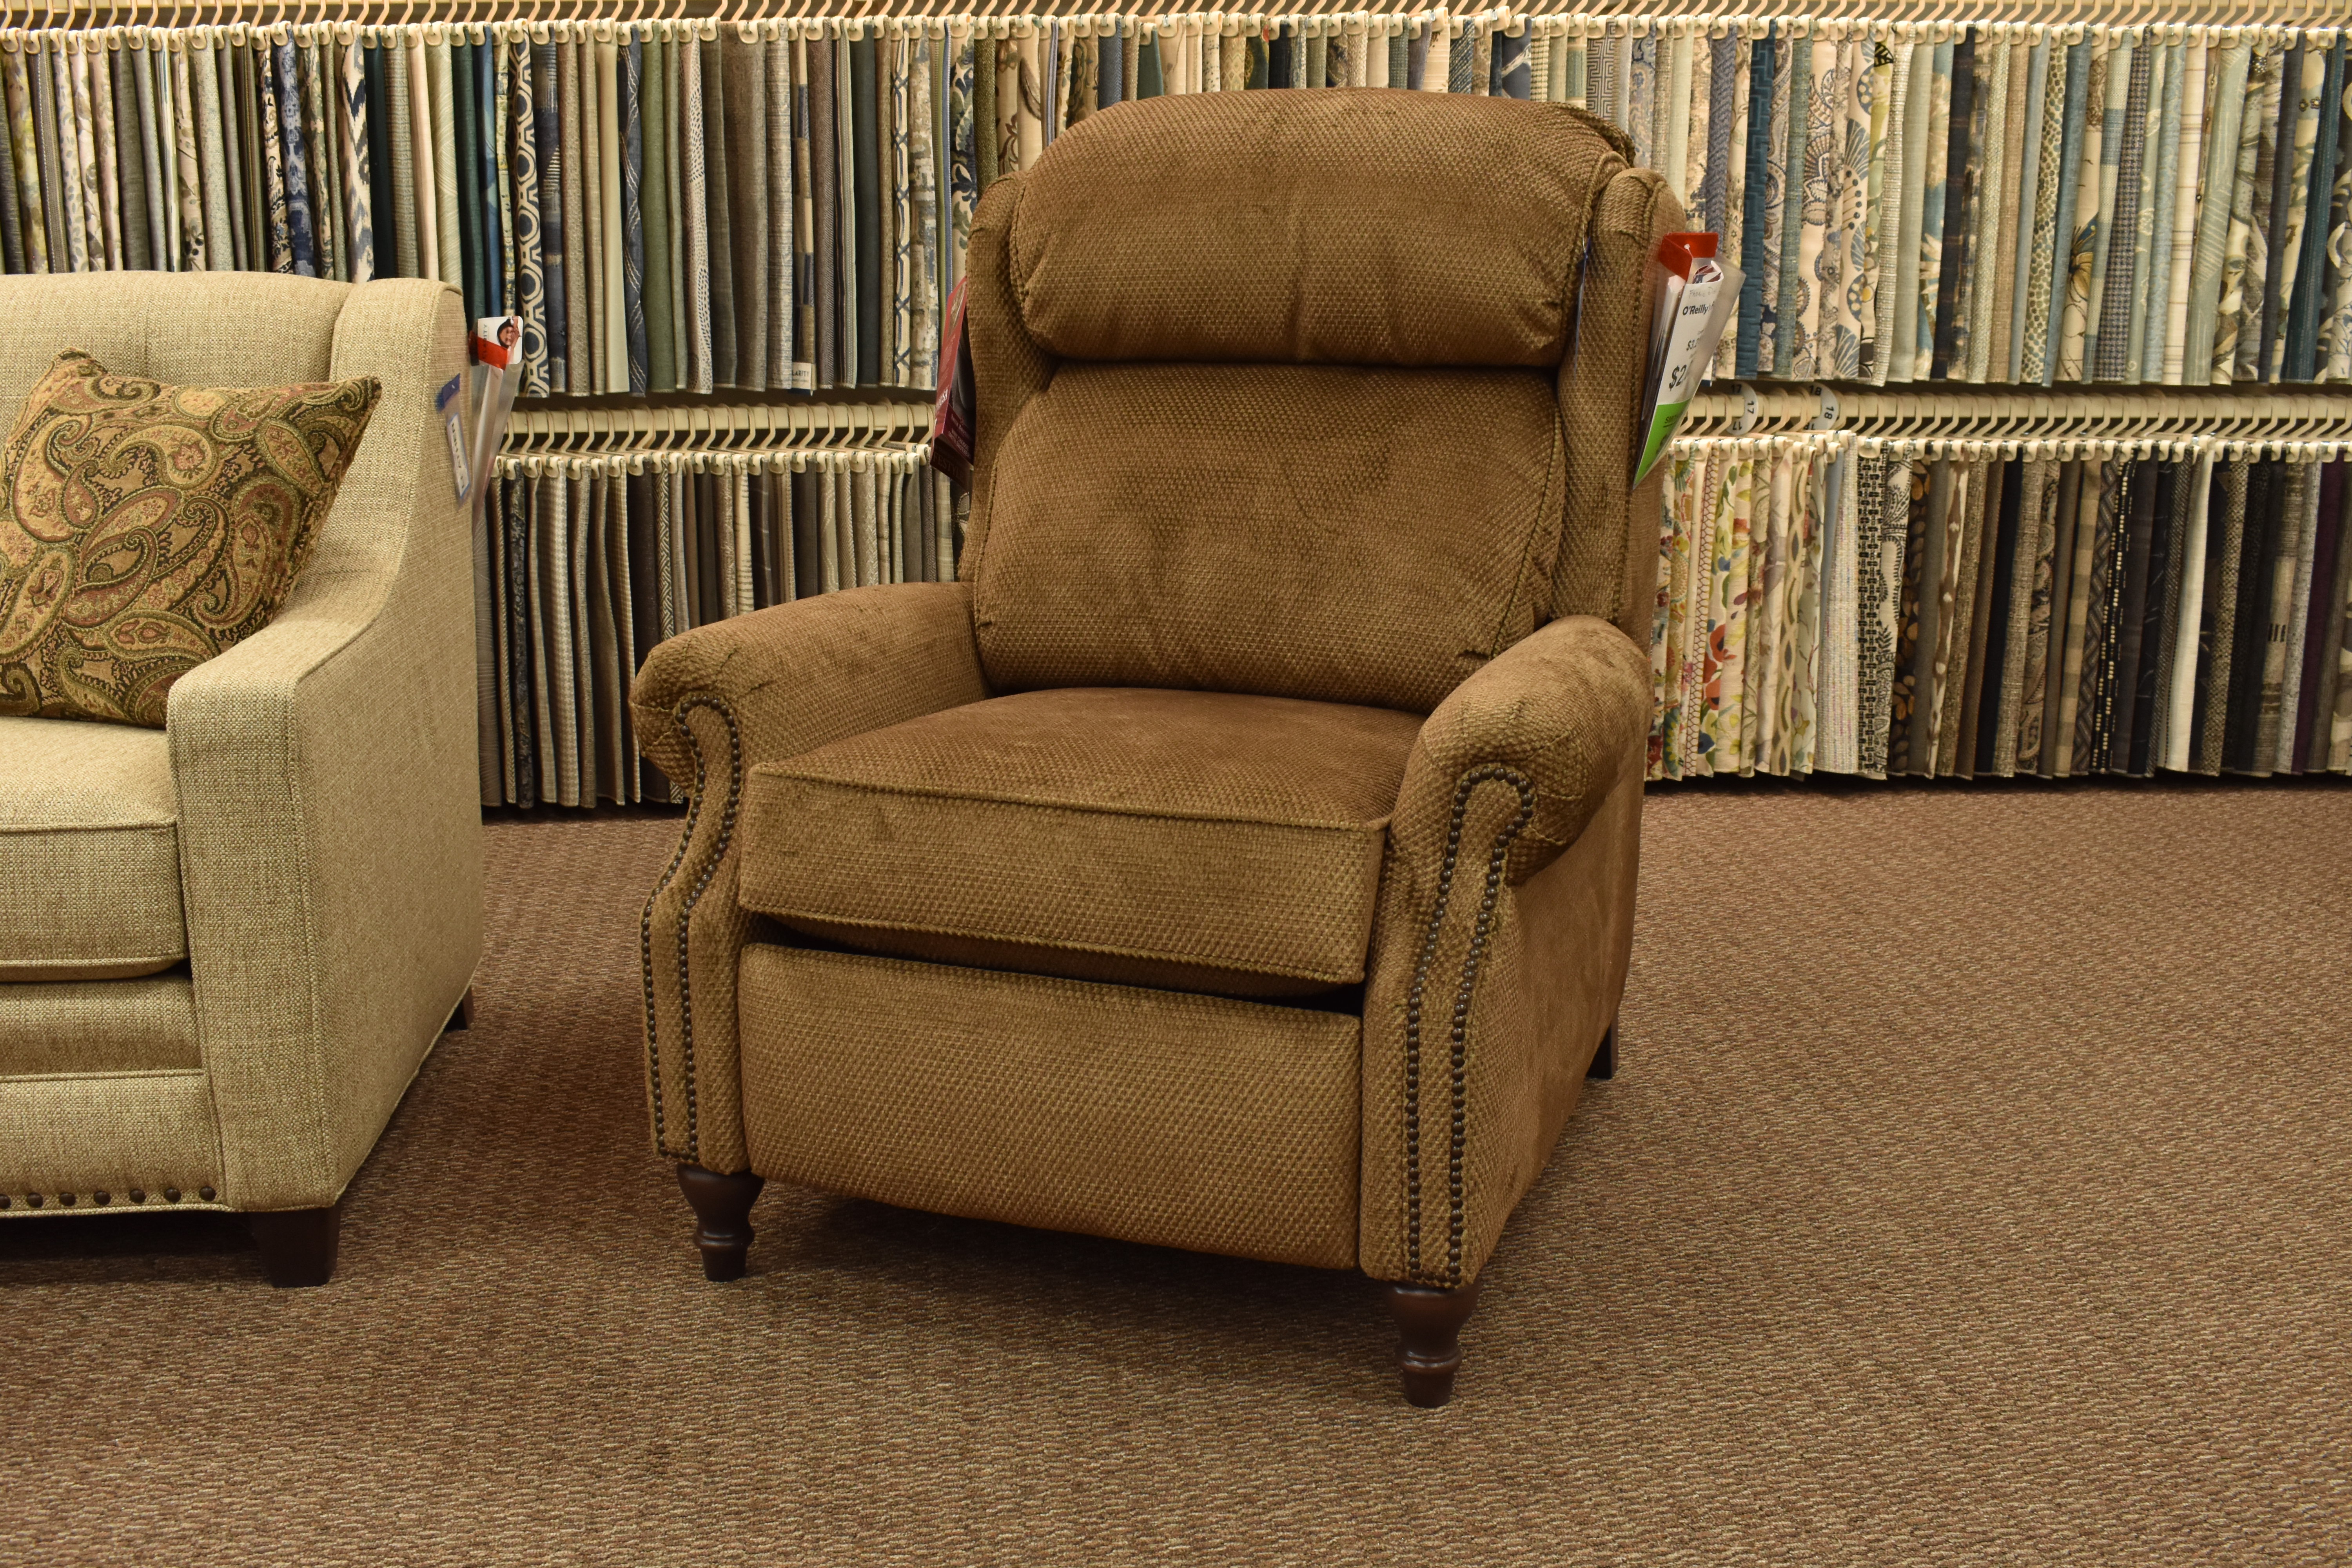 Smith 732 Recliner O Reilly S Furniture